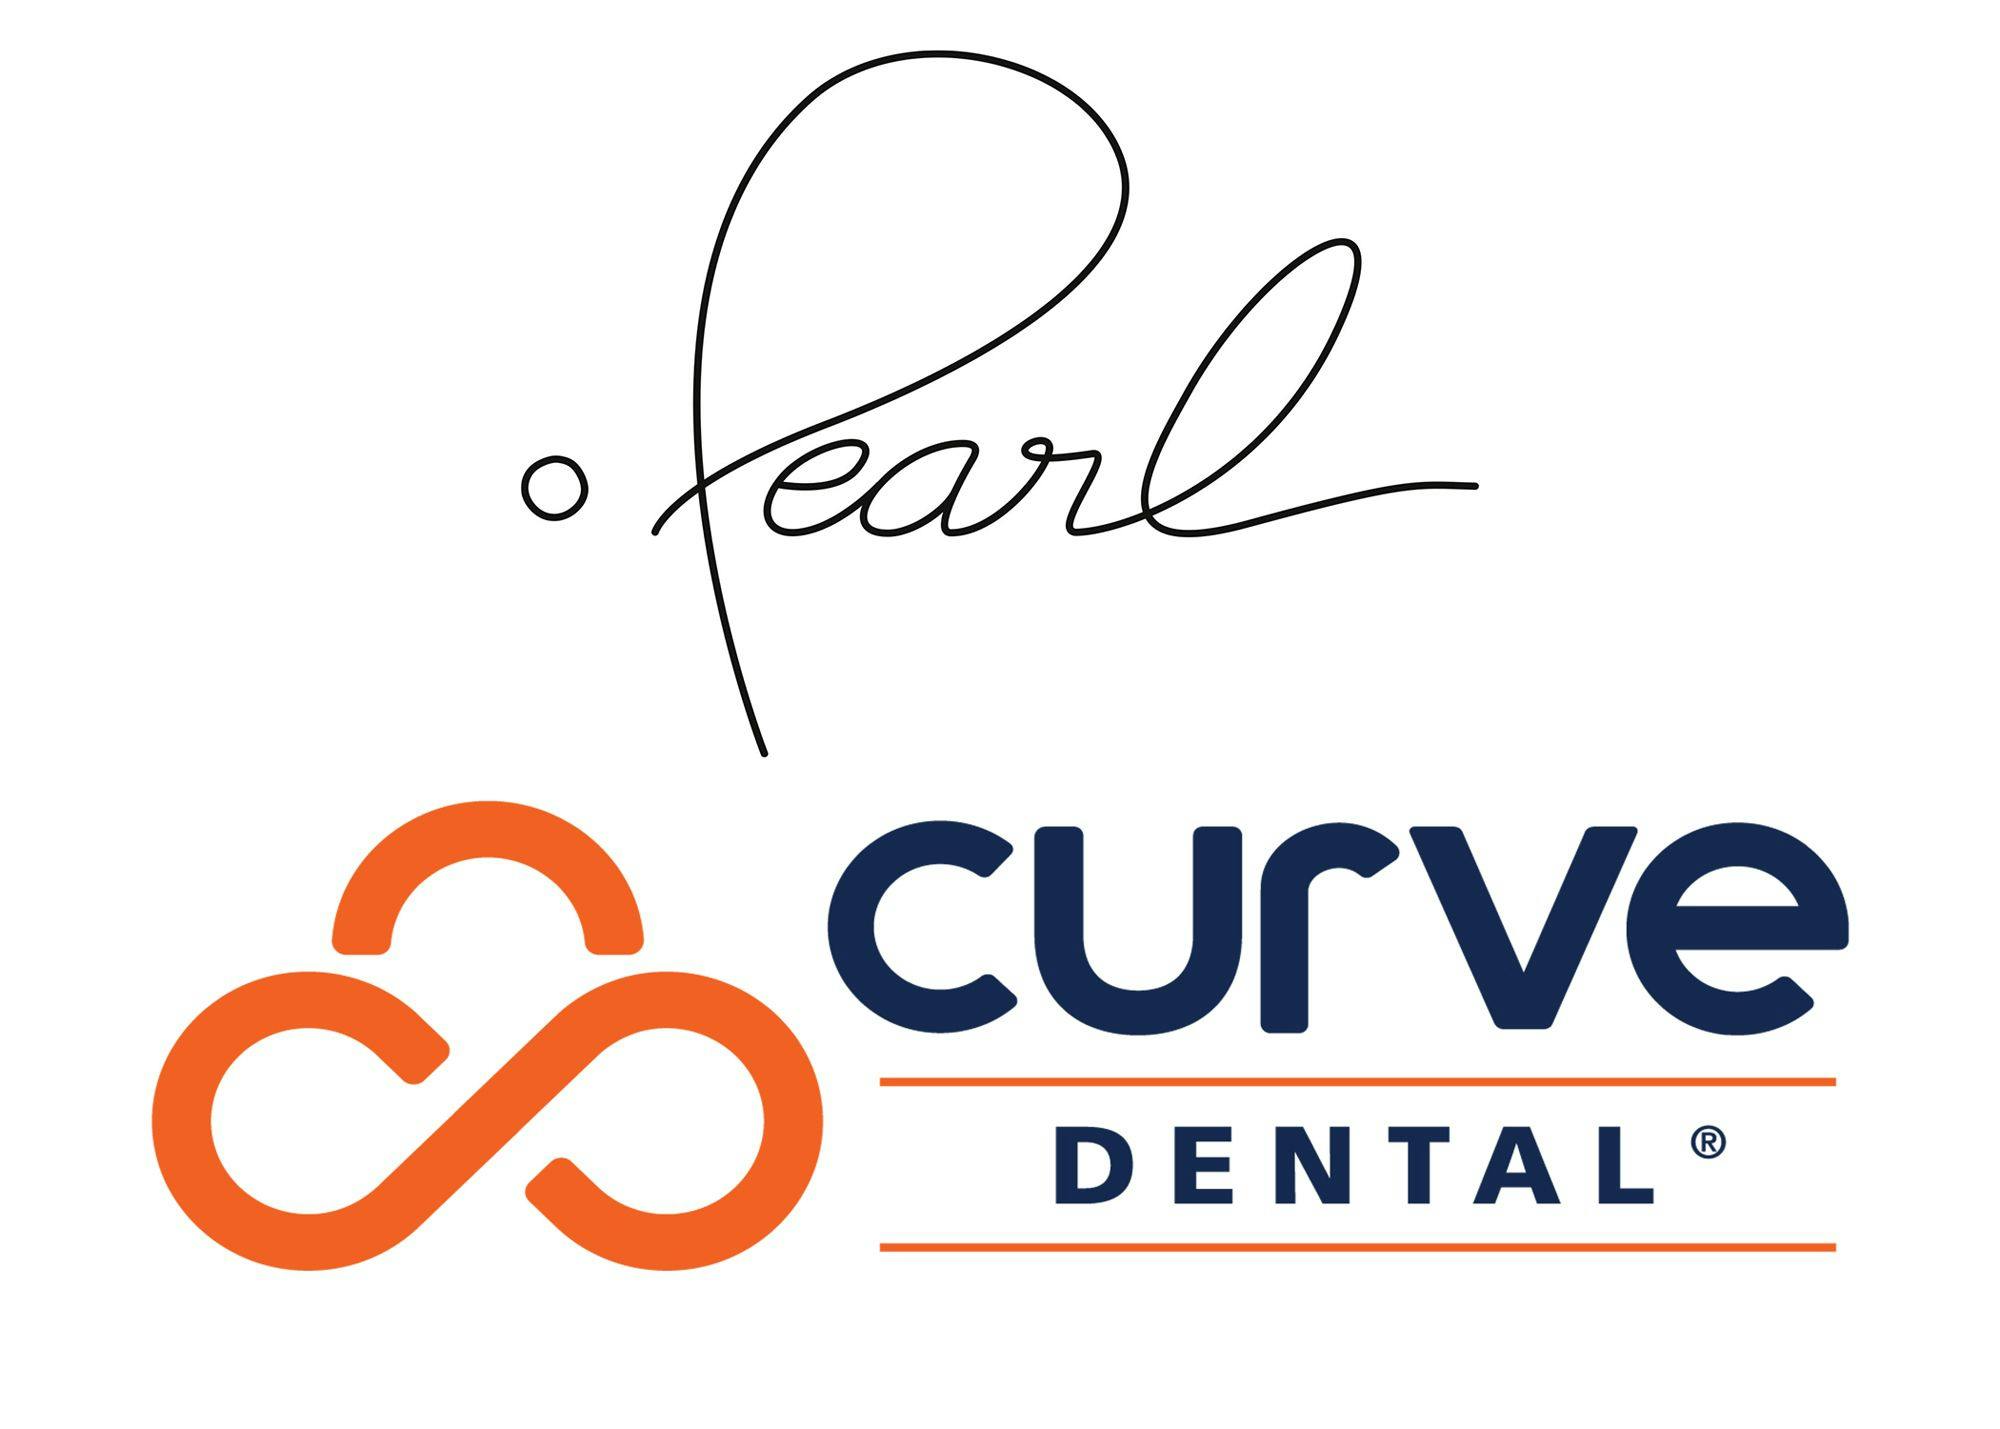 Curve Dental Integrates Pearl Artificial Intelligence into Practice Management System